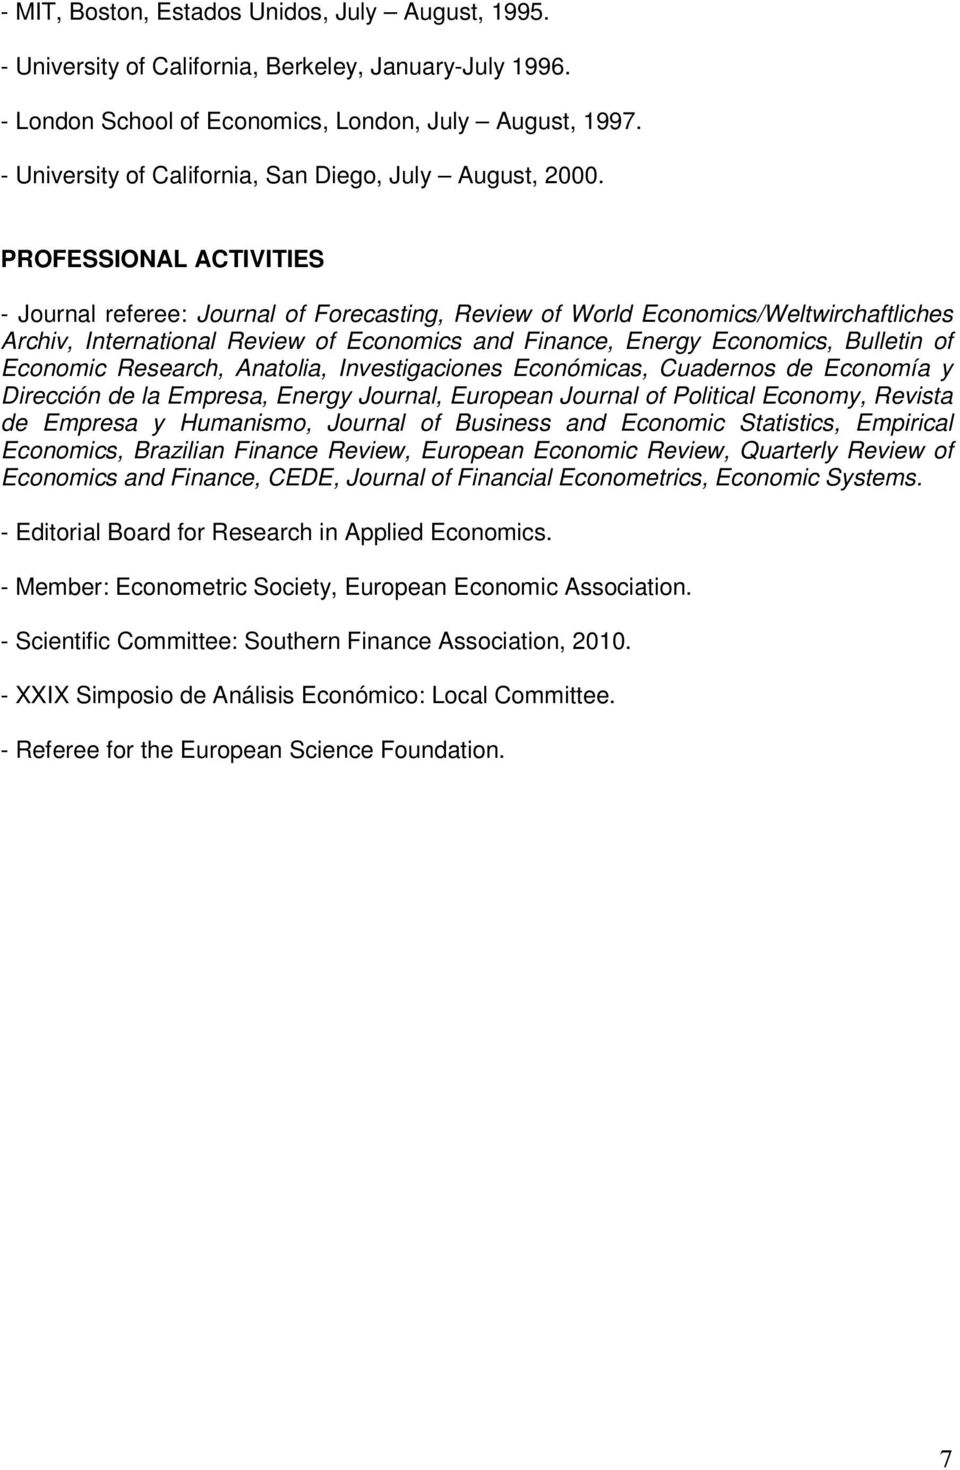 PROFESSIONAL ACTIVITIES - Journal referee: Journal of Forecasting, Review of World Economics/Weltwirchaftliches Archiv, International Review of Economics and Finance, Energy Economics, Bulletin of